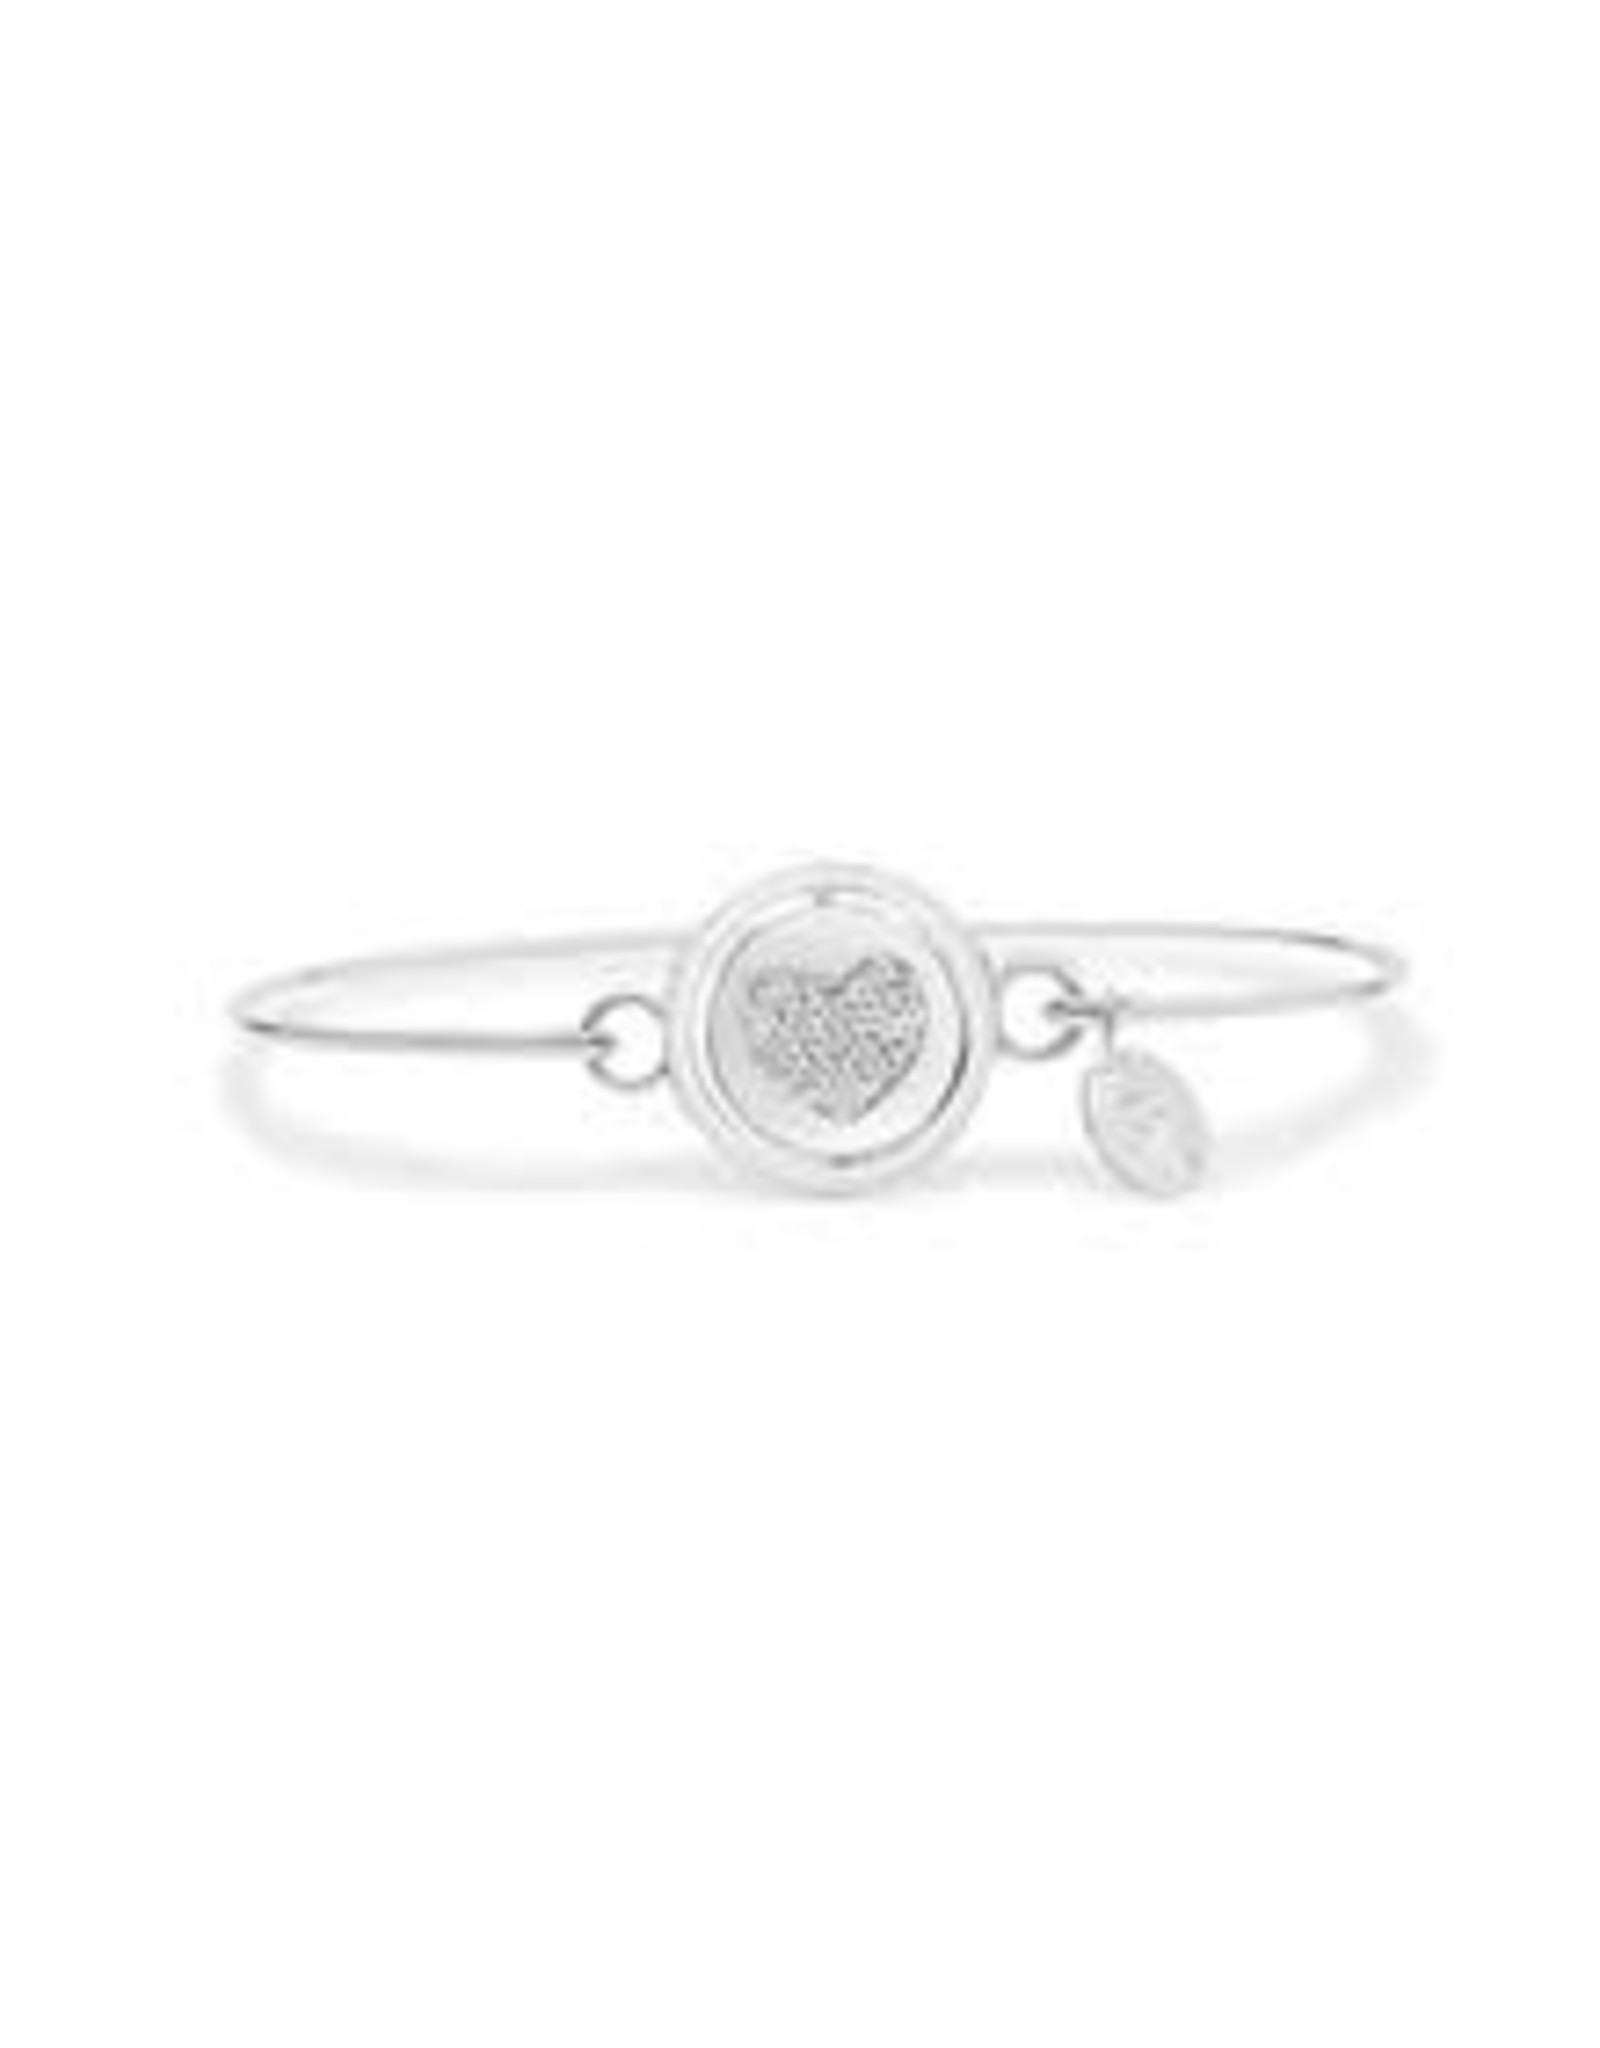 STIA COUTURE 060-SS-130   PAVE HEART SPINNING CHARM BR